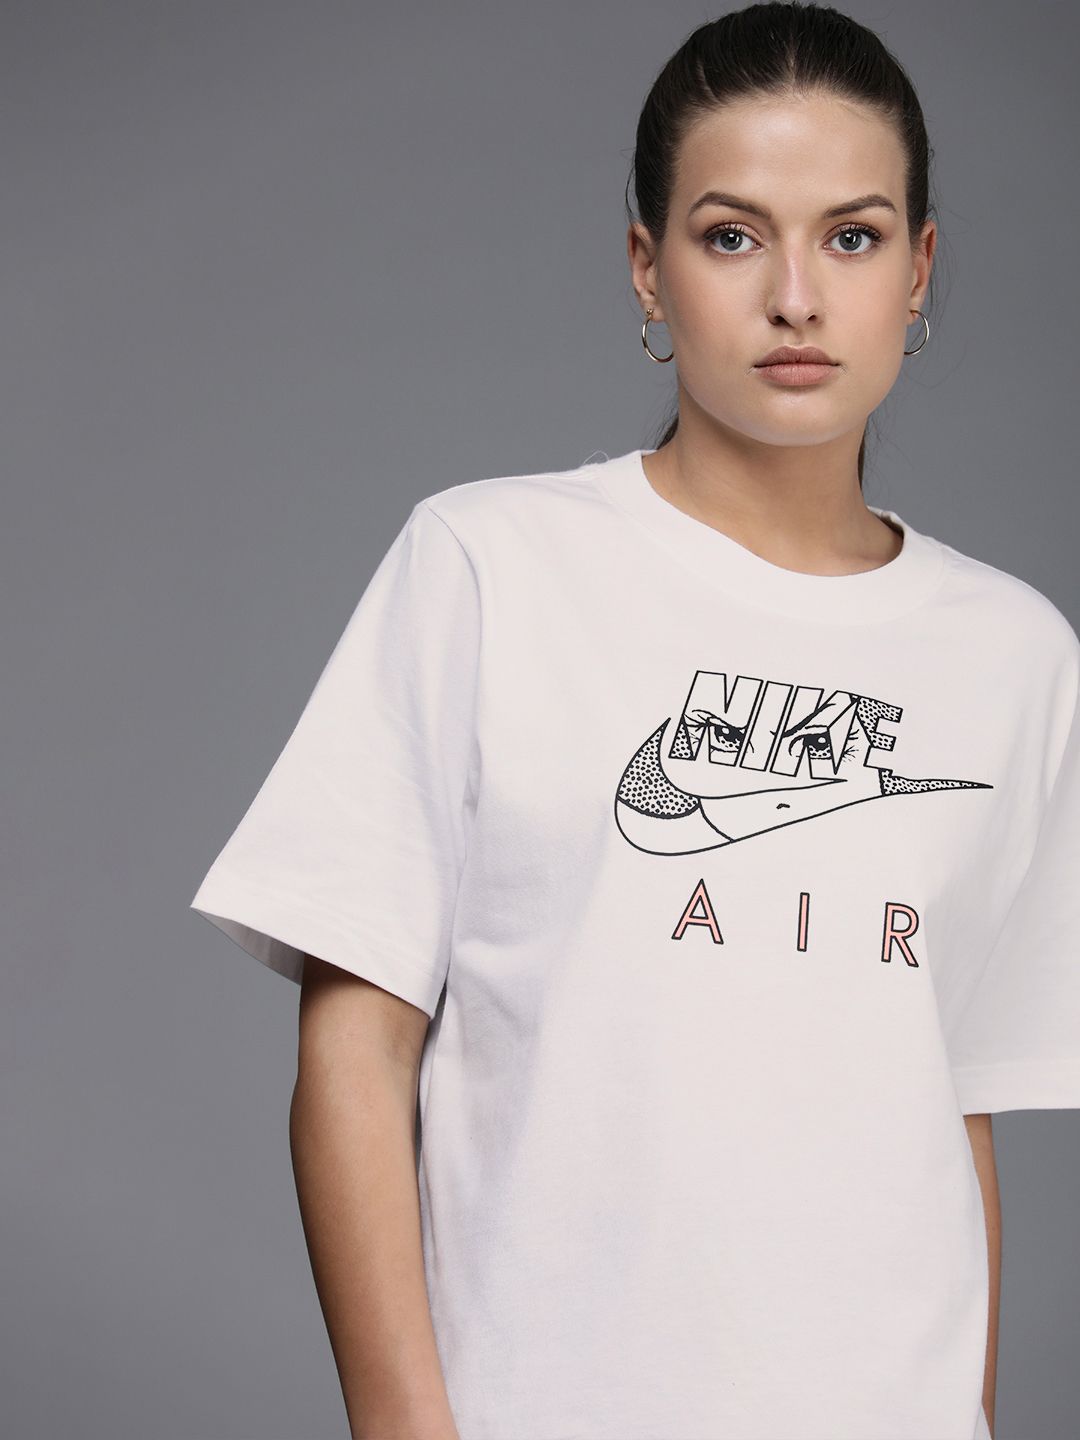 Nike Women White & Black Brand Logo Printed Pure Cotton Extended Sleeves Boxy T-shirt Price in India